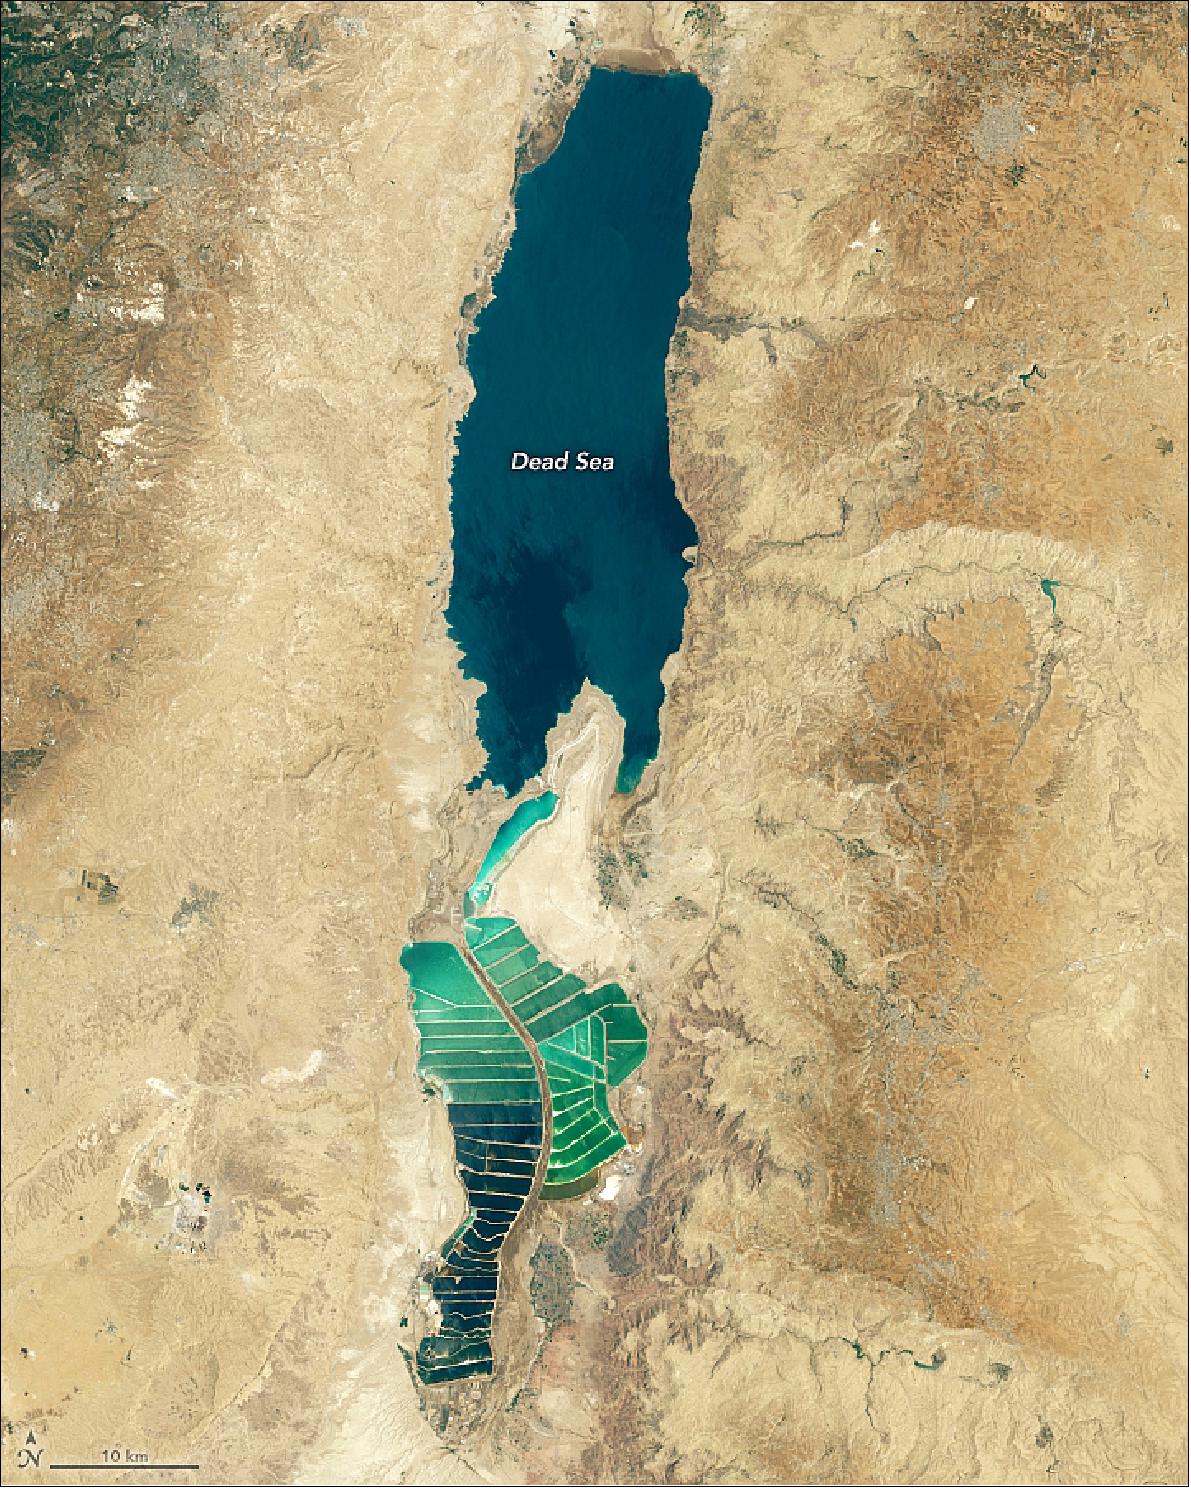 Figure 57: As water levels drop in the Dead Sea, salt is piling up on the lakebed. This image shows the Dead Sea and the Jordan Rift Valley on July 21 2019, as observed by the Operational Land Imager on the Landsat 8 satellite. The green rectangles on the south end of the lake are salt evaporation ponds, which are used to extract sodium chloride and potassium salts for the manufacturing of polyvinyl chloride (PVC) and other chemicals (image credit: NASA Earth Observatory images by Lauren Dauphin, using Landsat data from the U.S. Geological Survey. Story by Kasha Patel)